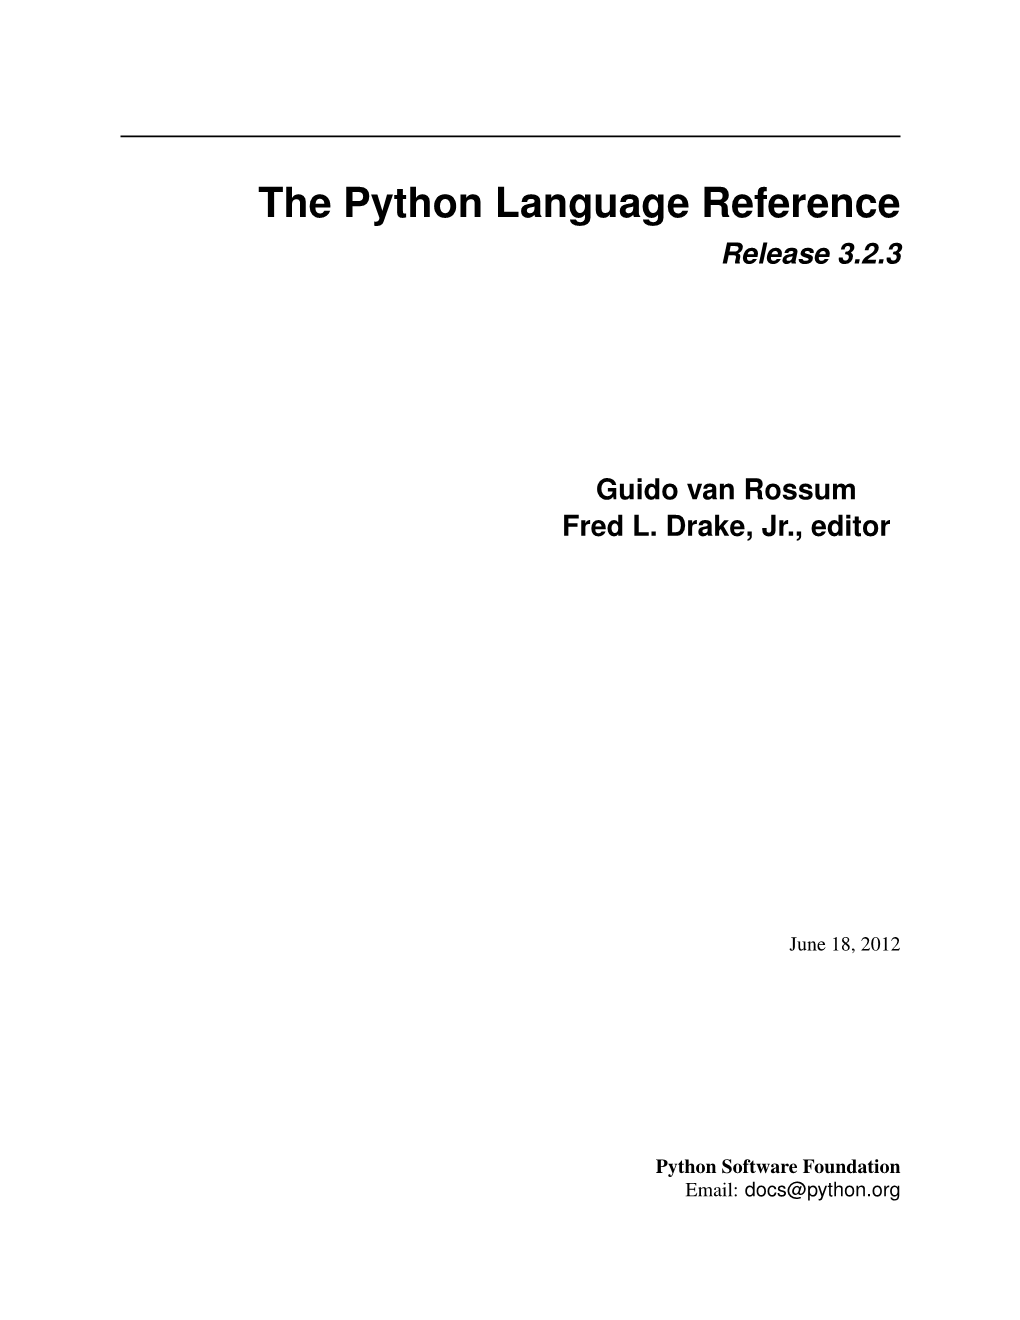 The Python Language Reference Release 3.2.3